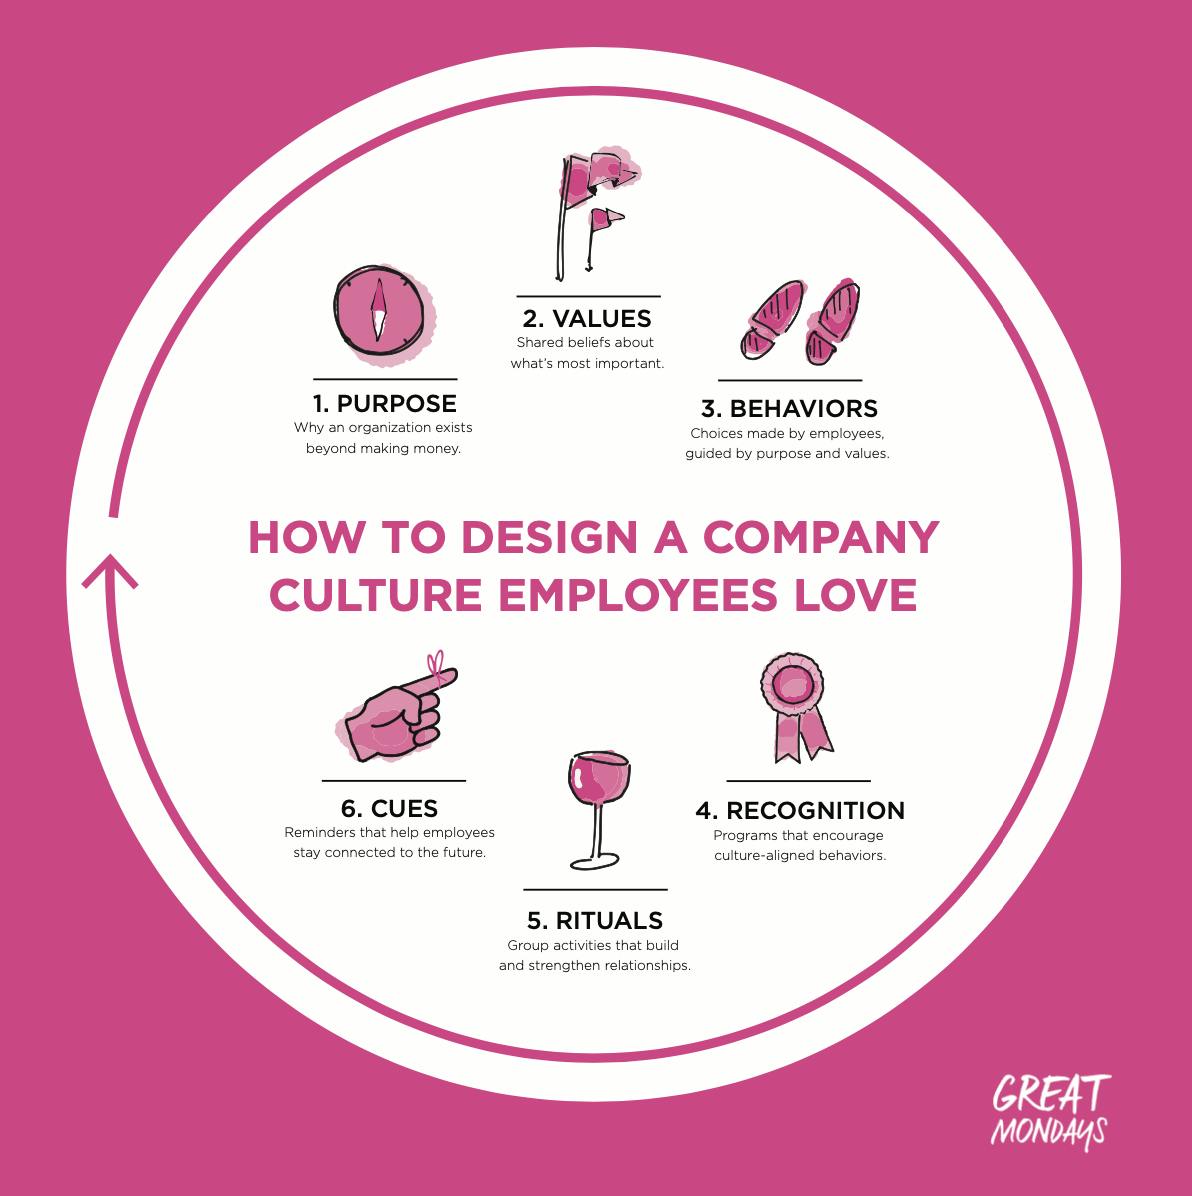 How to design a company culture employees love